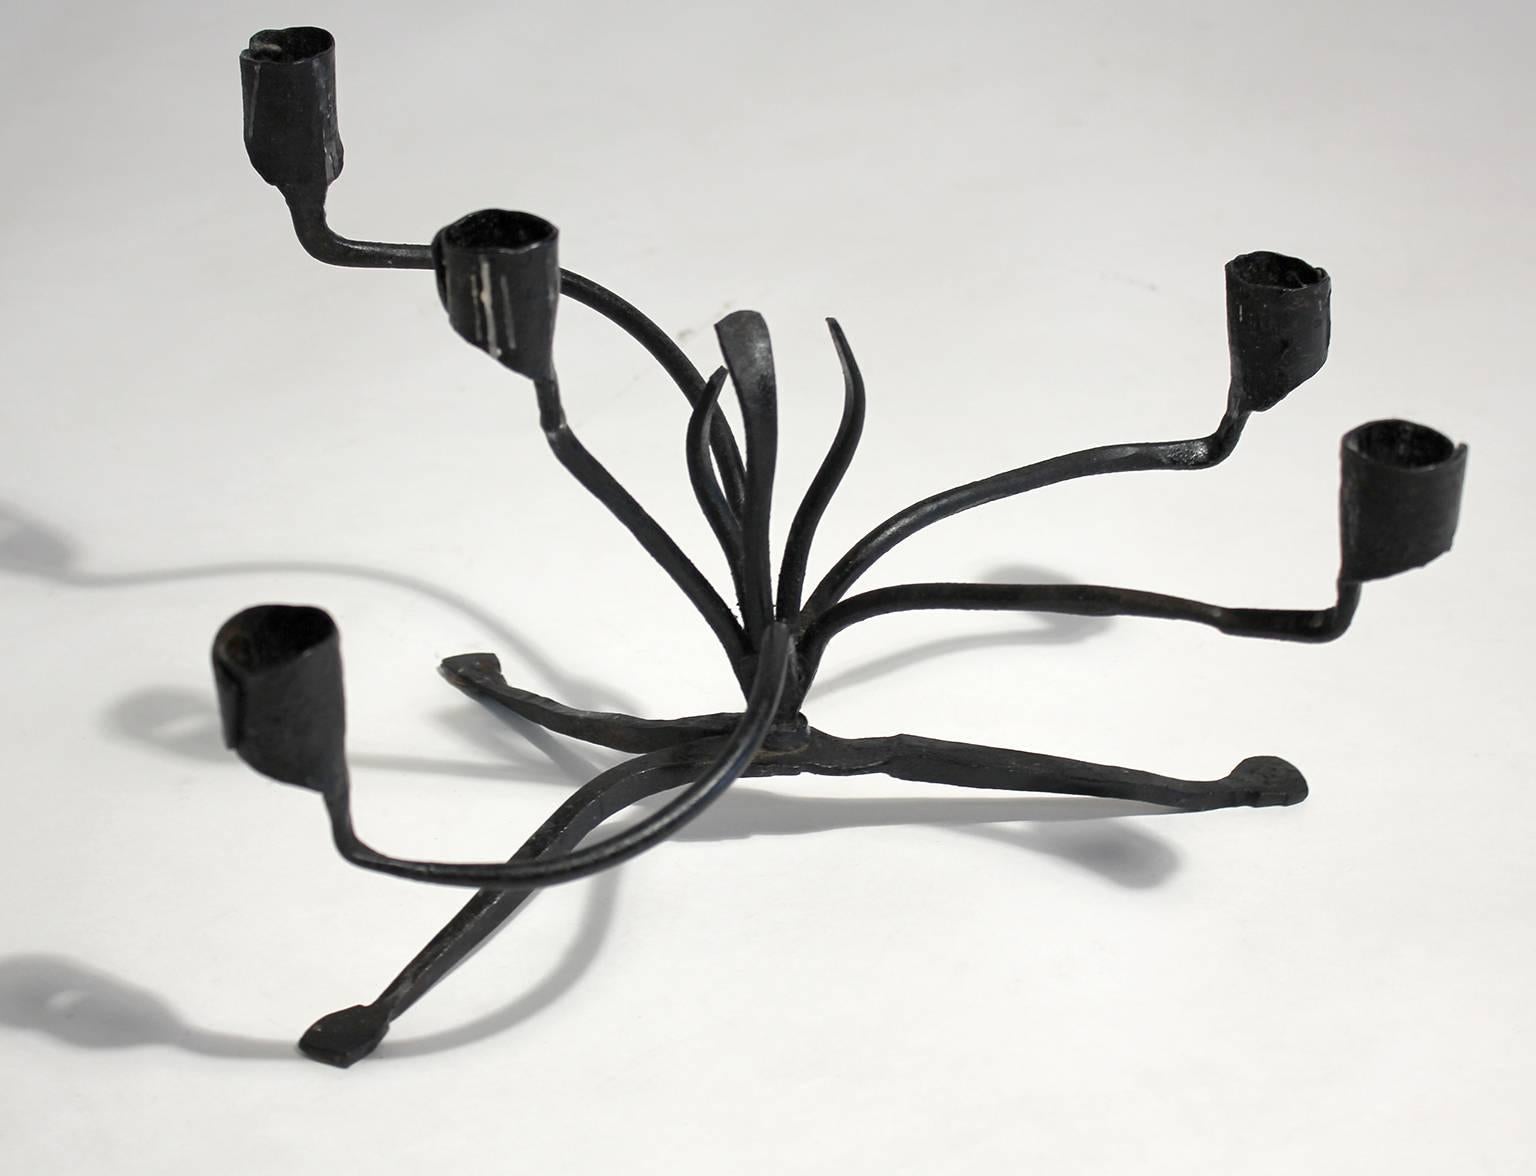 Brutalist Forged Iron Candelabra by C. Carl Jennings